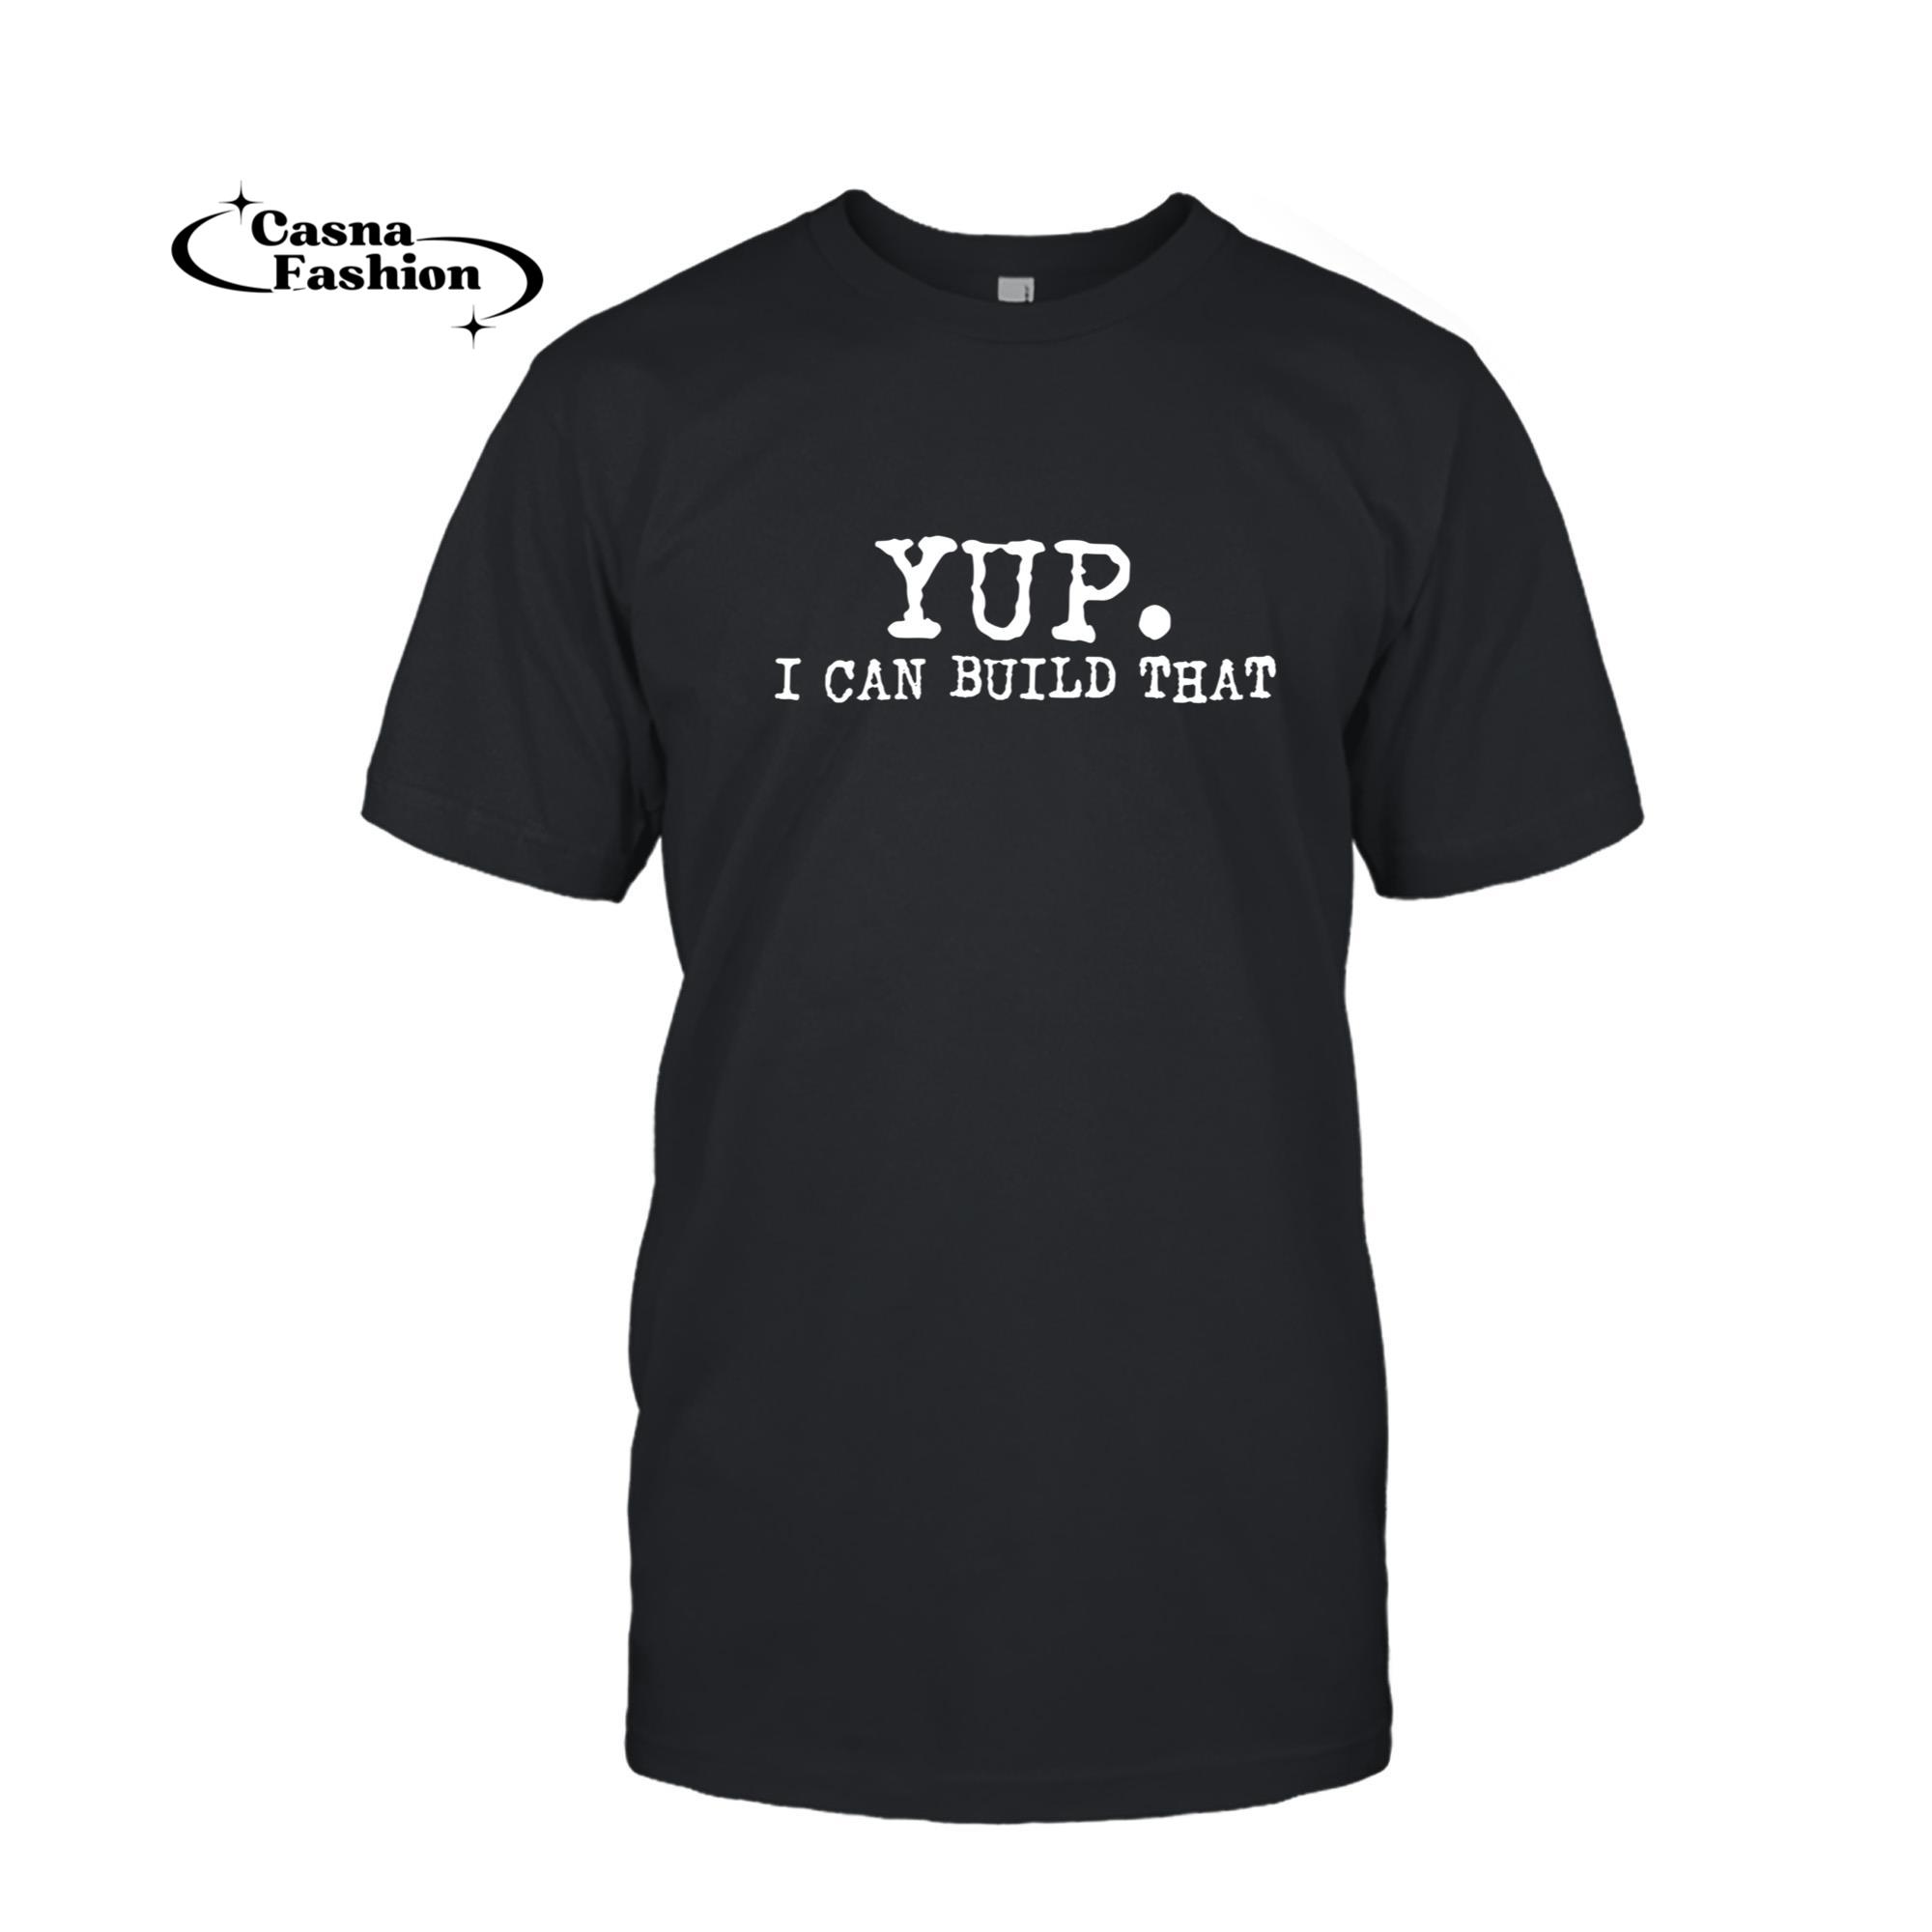 casnafashion_T-shirt_Yup I Can Build That Funny Woodworking Carpenter Quote Gift Sweatshirt_T-shirt_Black